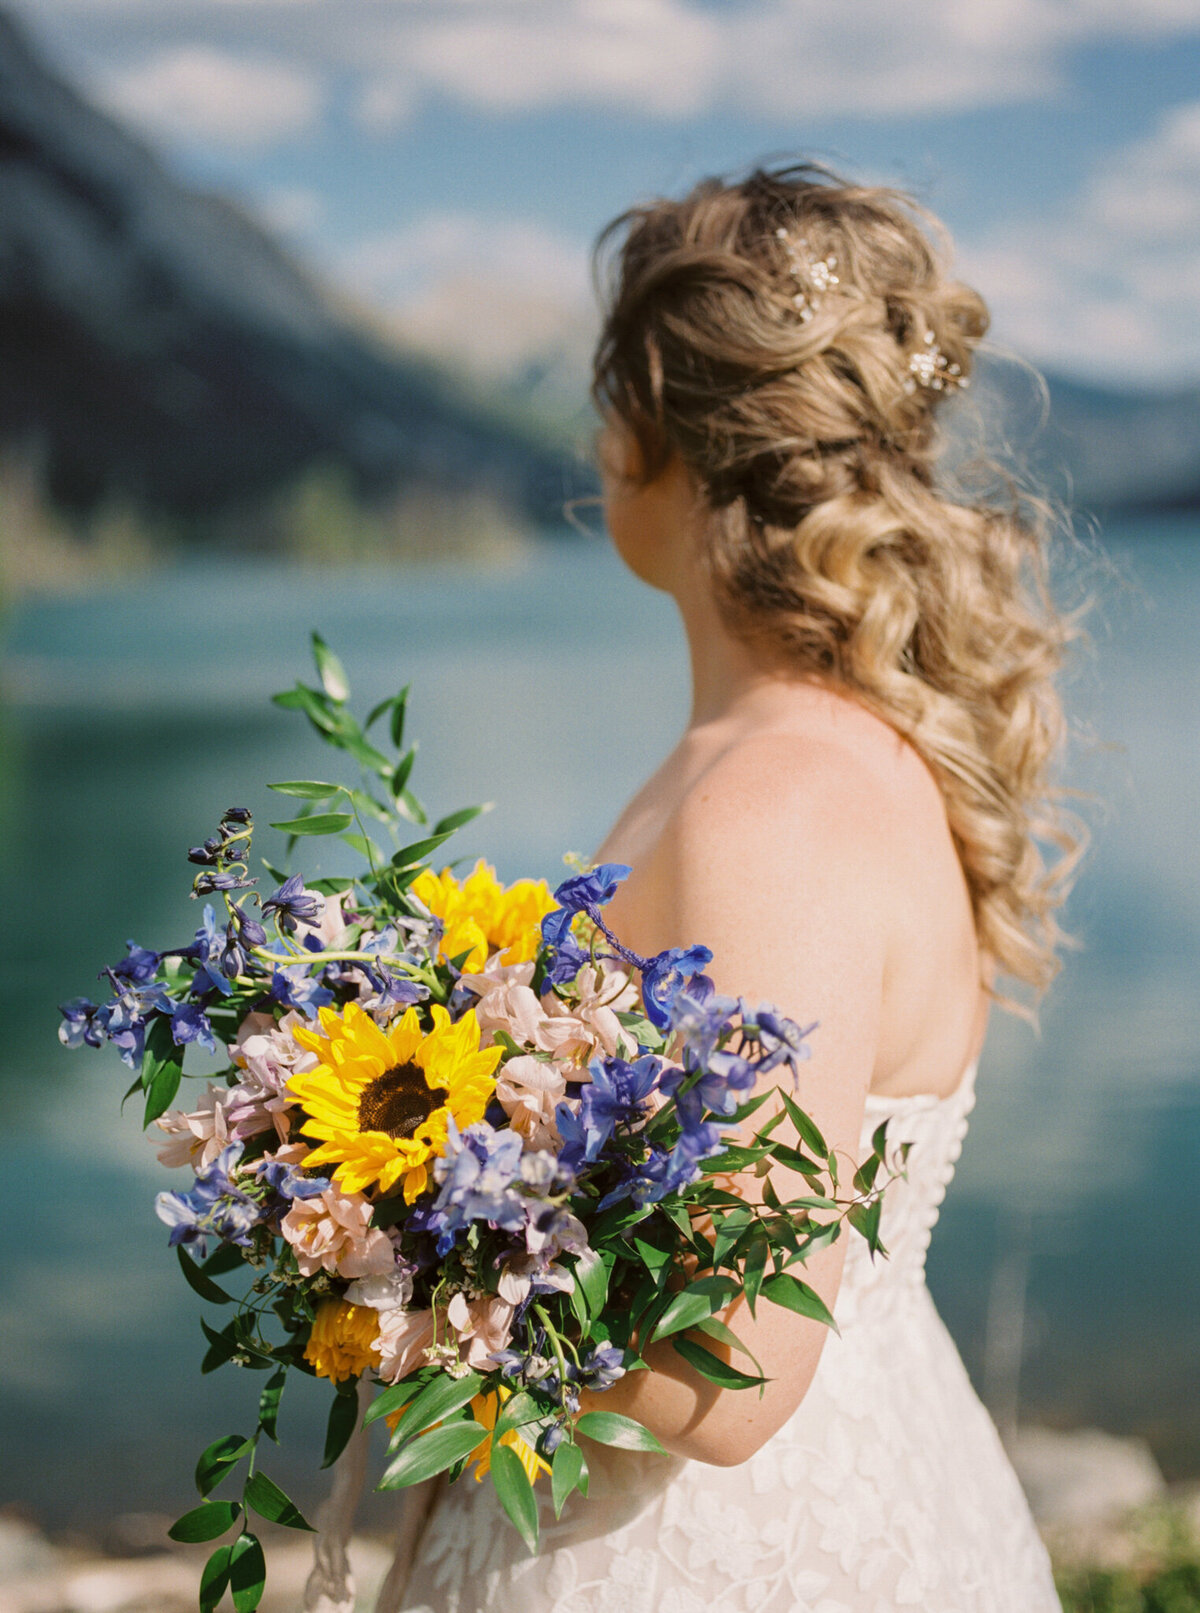 Classic bridal portrait with stunning wildflowers captured by Pam Kriangkum Photography, fine art, classic wedding photographer in Edmonton, Alberta. Featured on the Bronte Bride Vendor Guide.